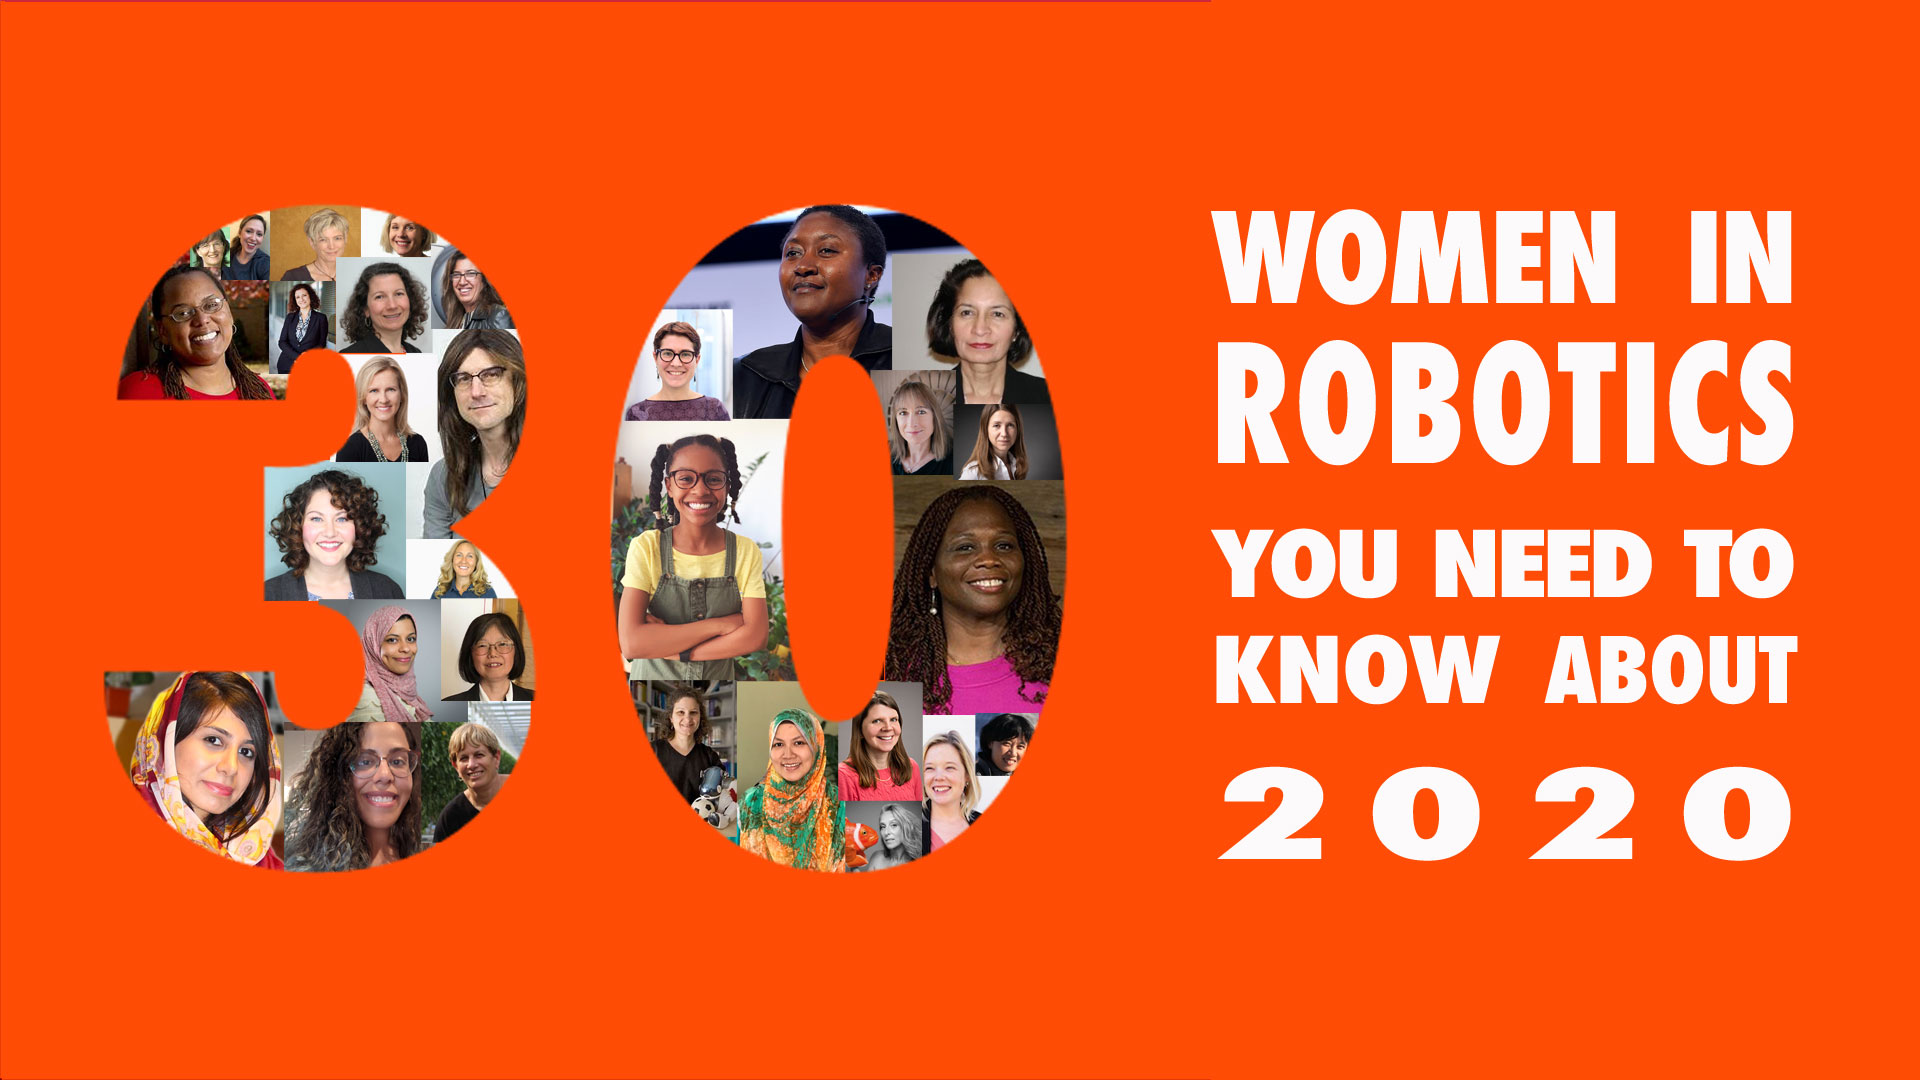 Women in Robotics you need to know about 2020